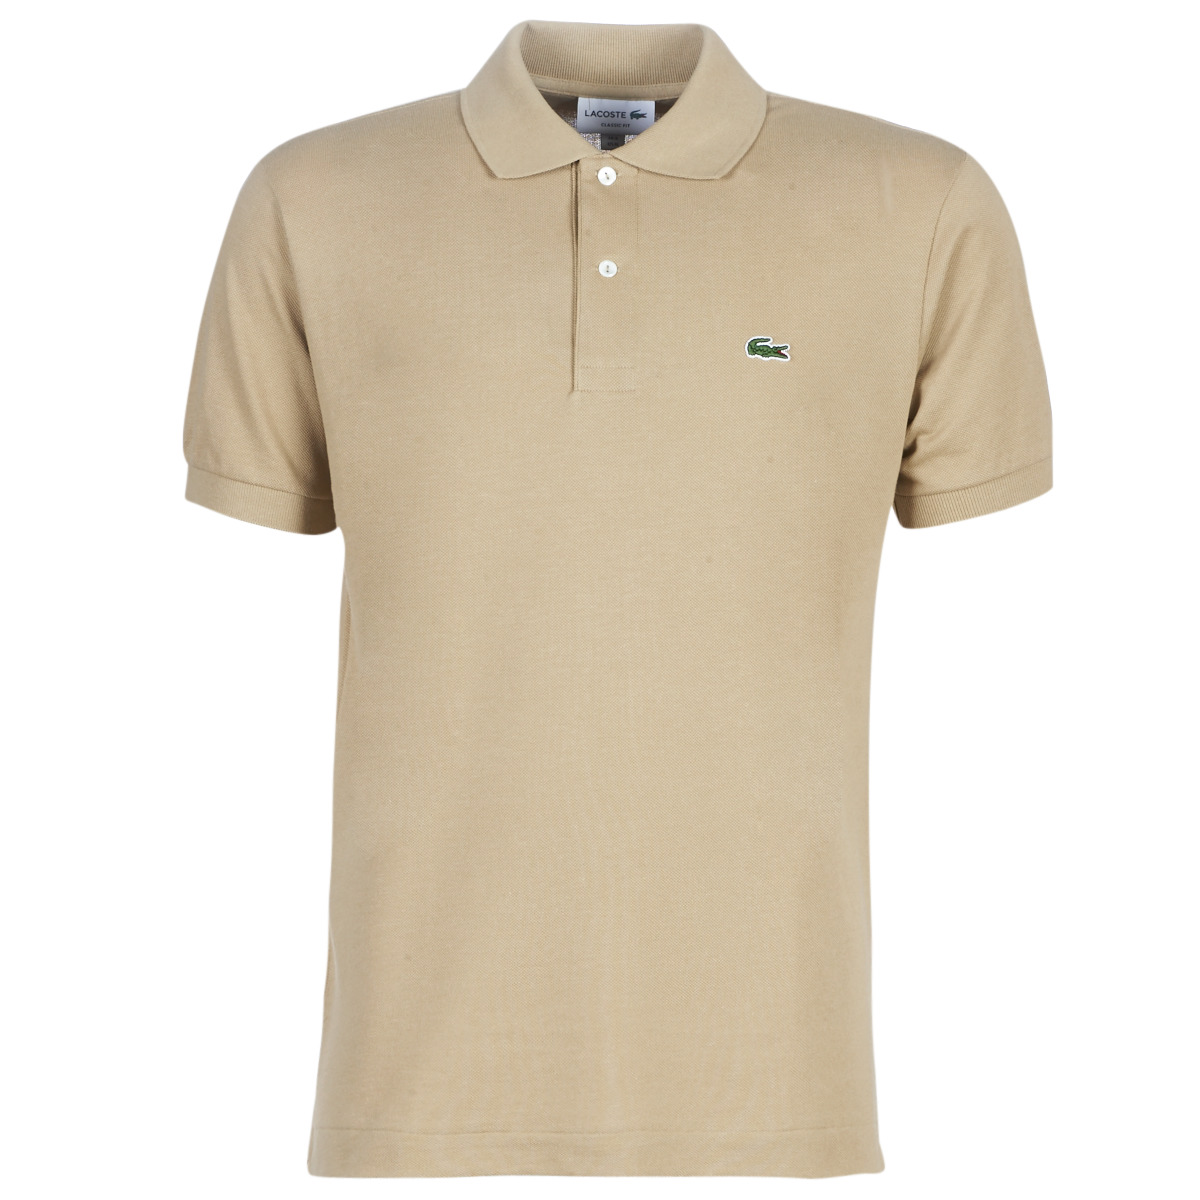 children's lacoste polo shirts